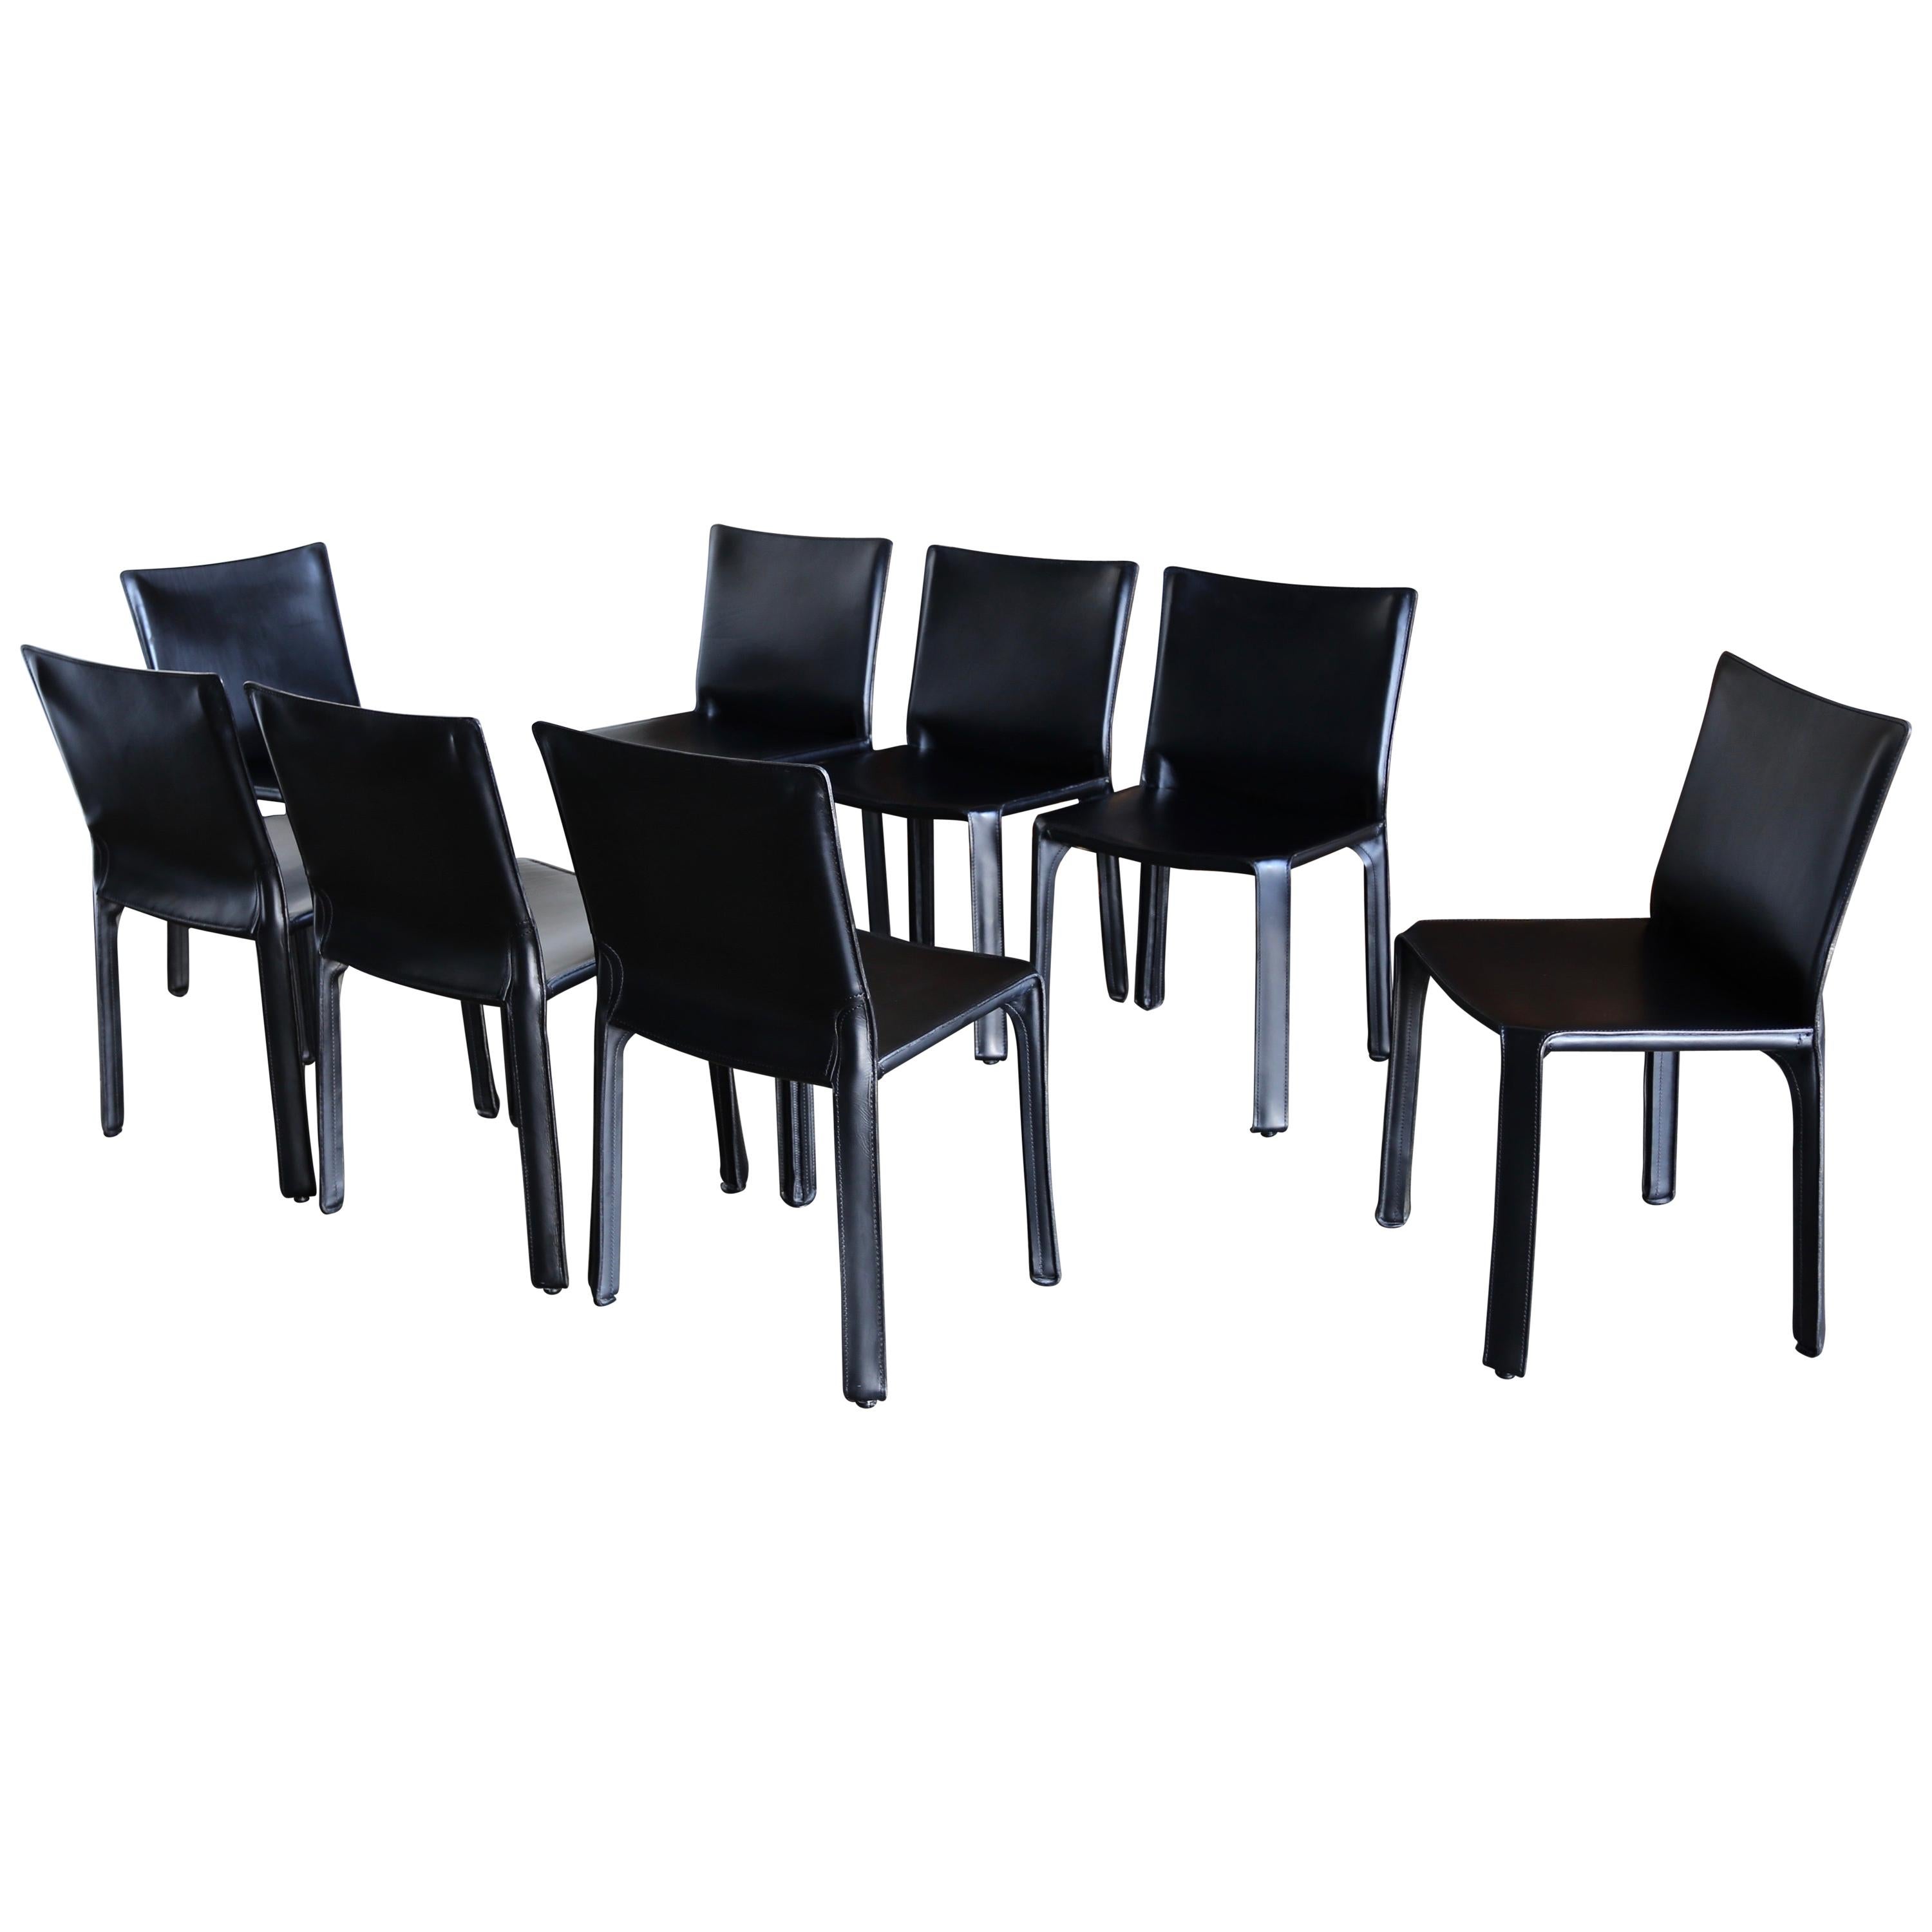 Mario Bellini Black Leather "Cab" Chairs for Cassina